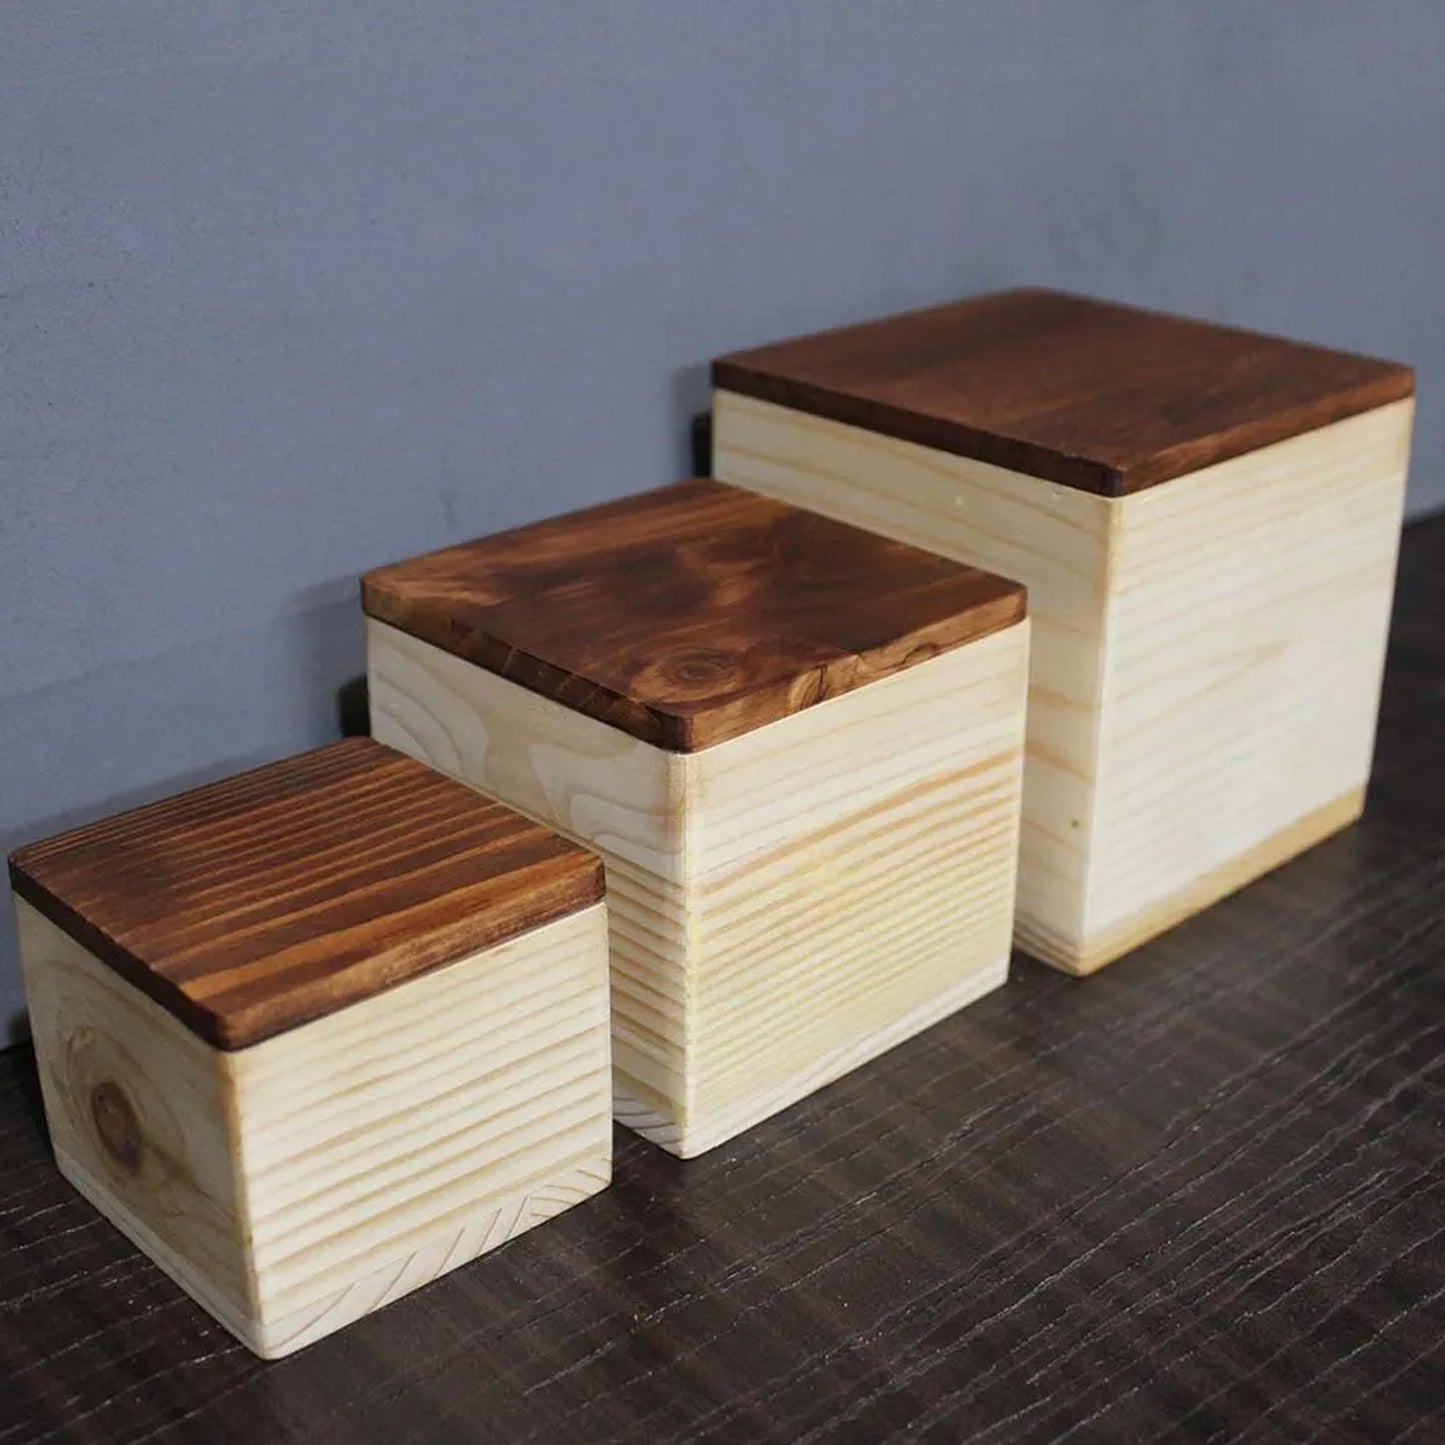 Handcrafted Wooden Box Set : Desktop / Tabletop Organizer : A Set Of 3 Boxes